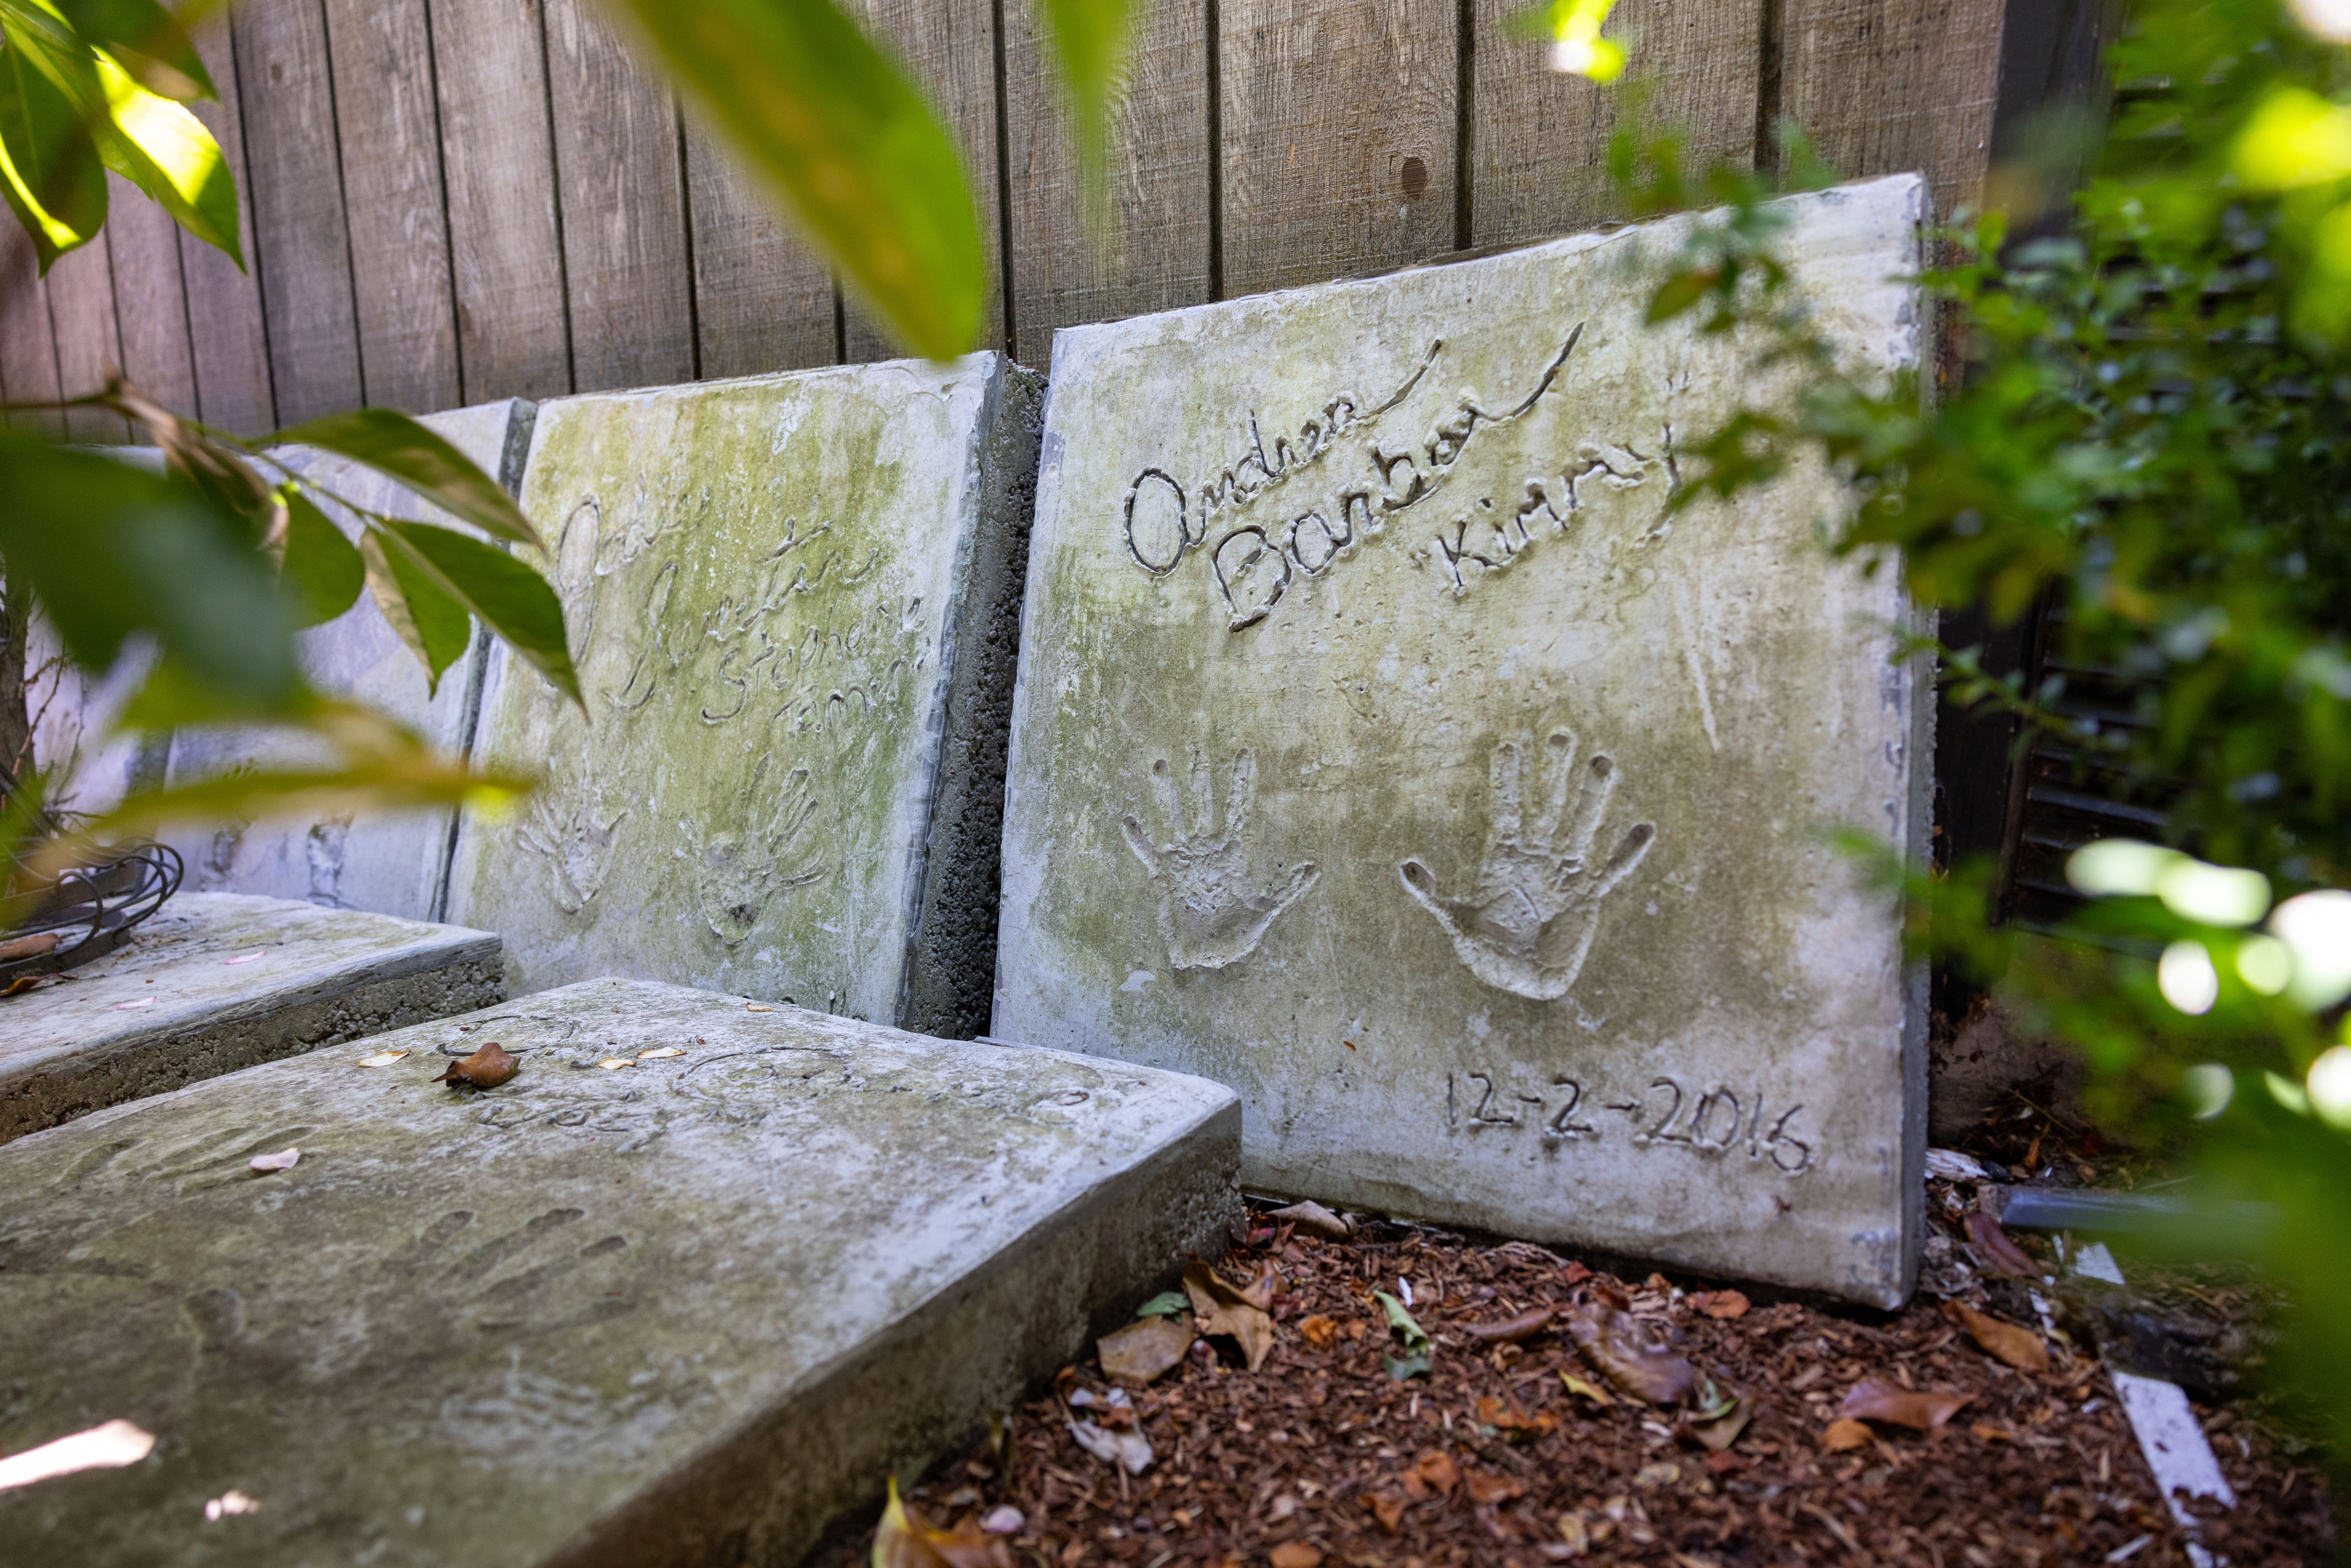 Concrete slabs with handprints and names etched in them rest against a wooden fence, surrounded by foliage. One slab is dated 12-2-2016.